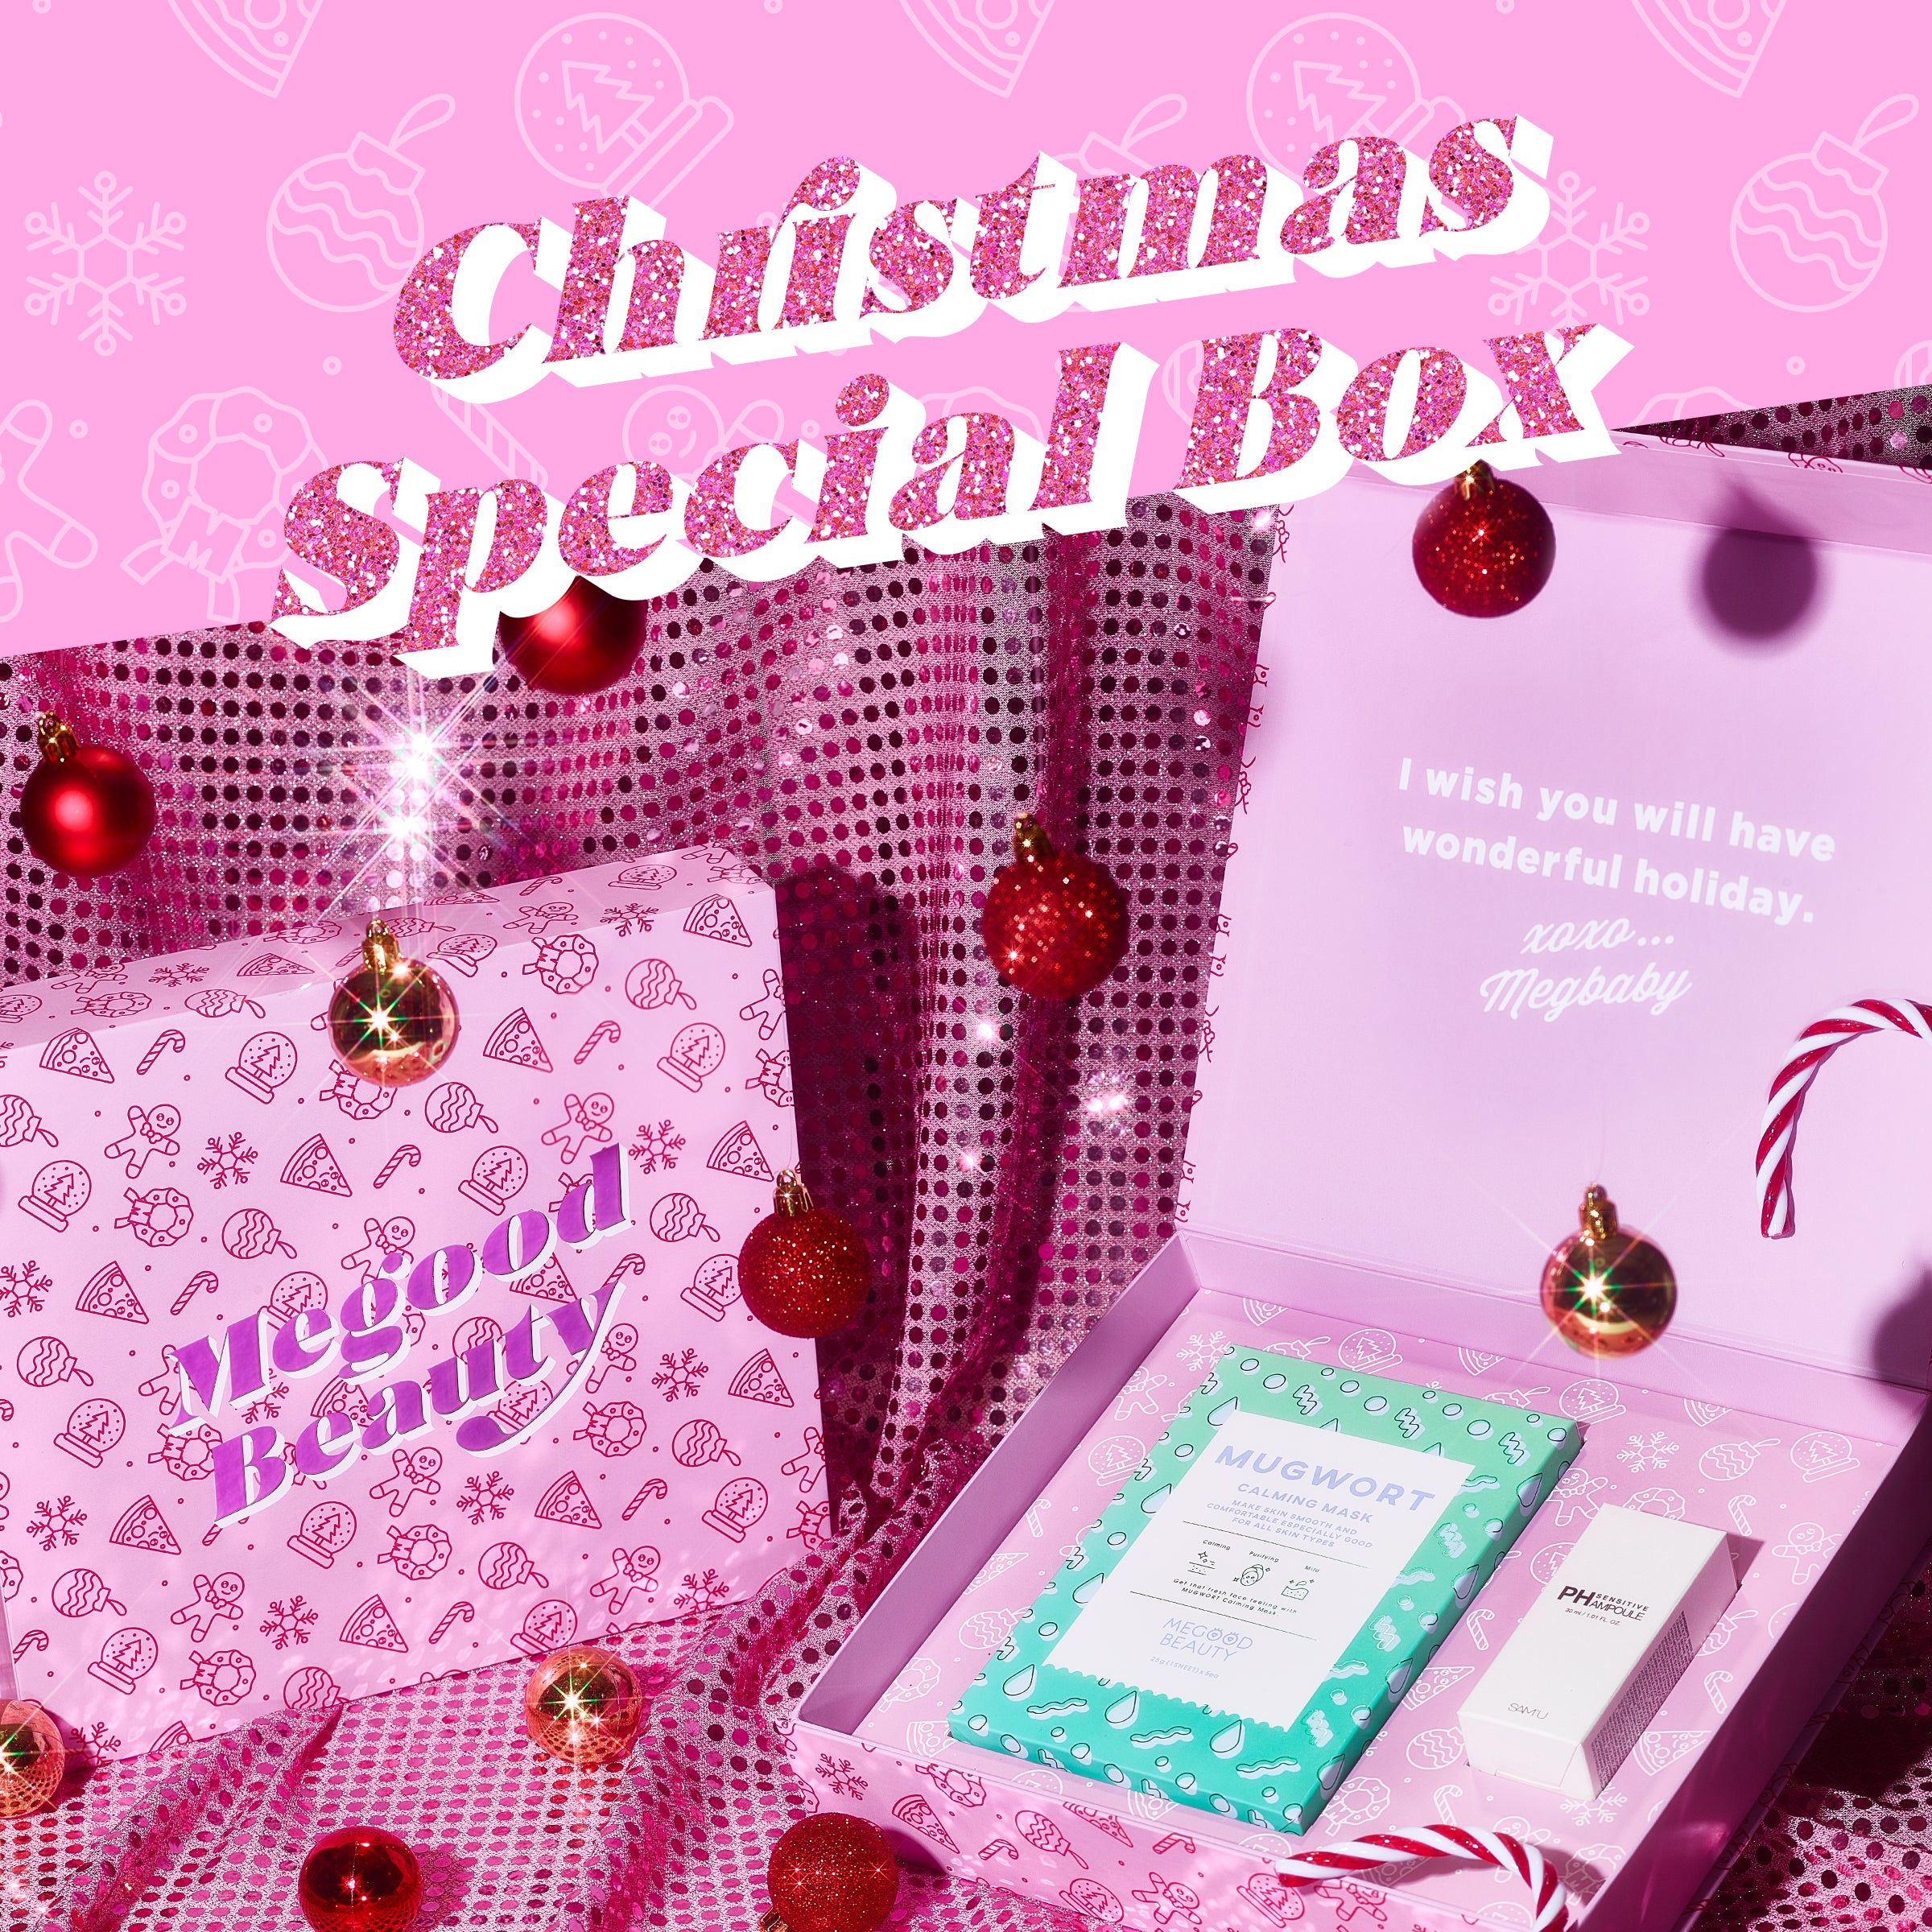 【SAVE THE DATE】CHRISTMAS SPECIAL BOX December 1st From 5PM